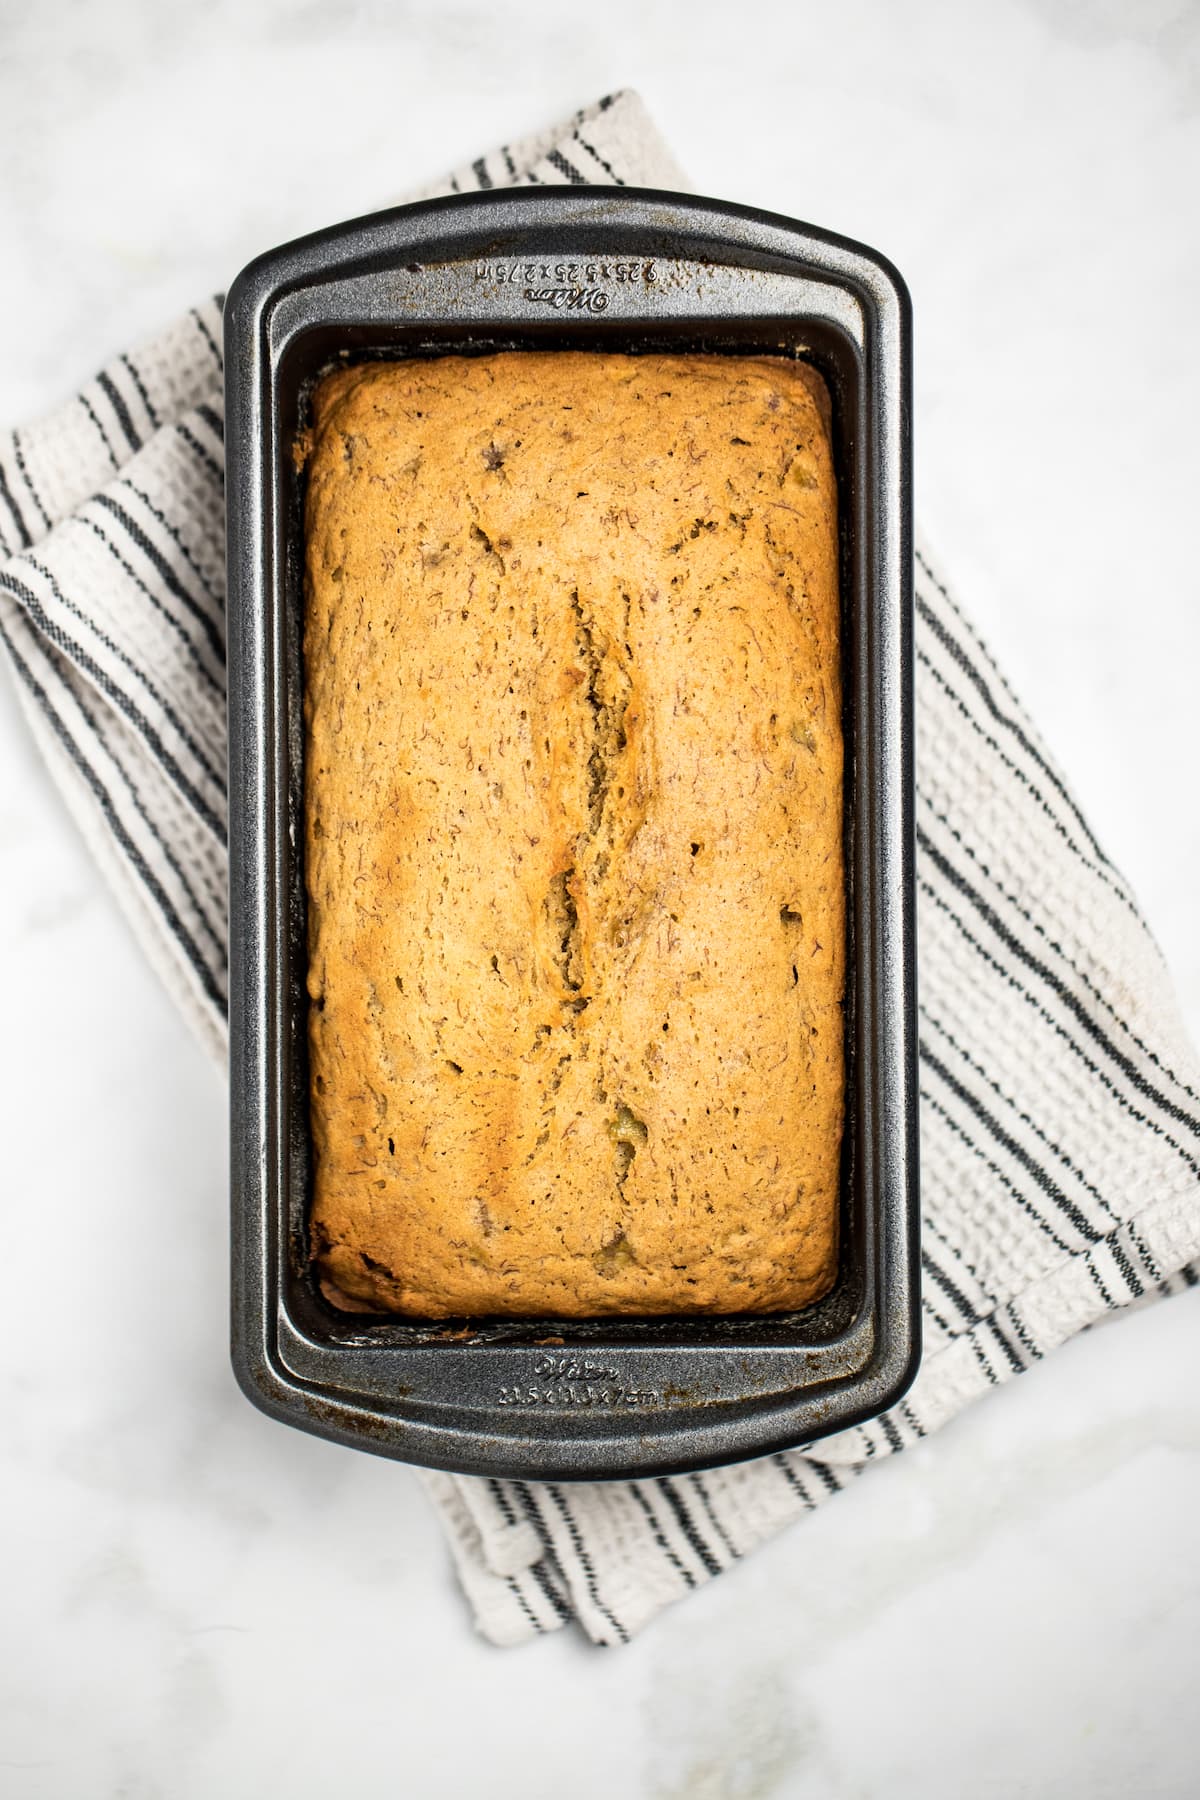 Pinterest pin with a loaf of banana bread in a bread pan on a table.